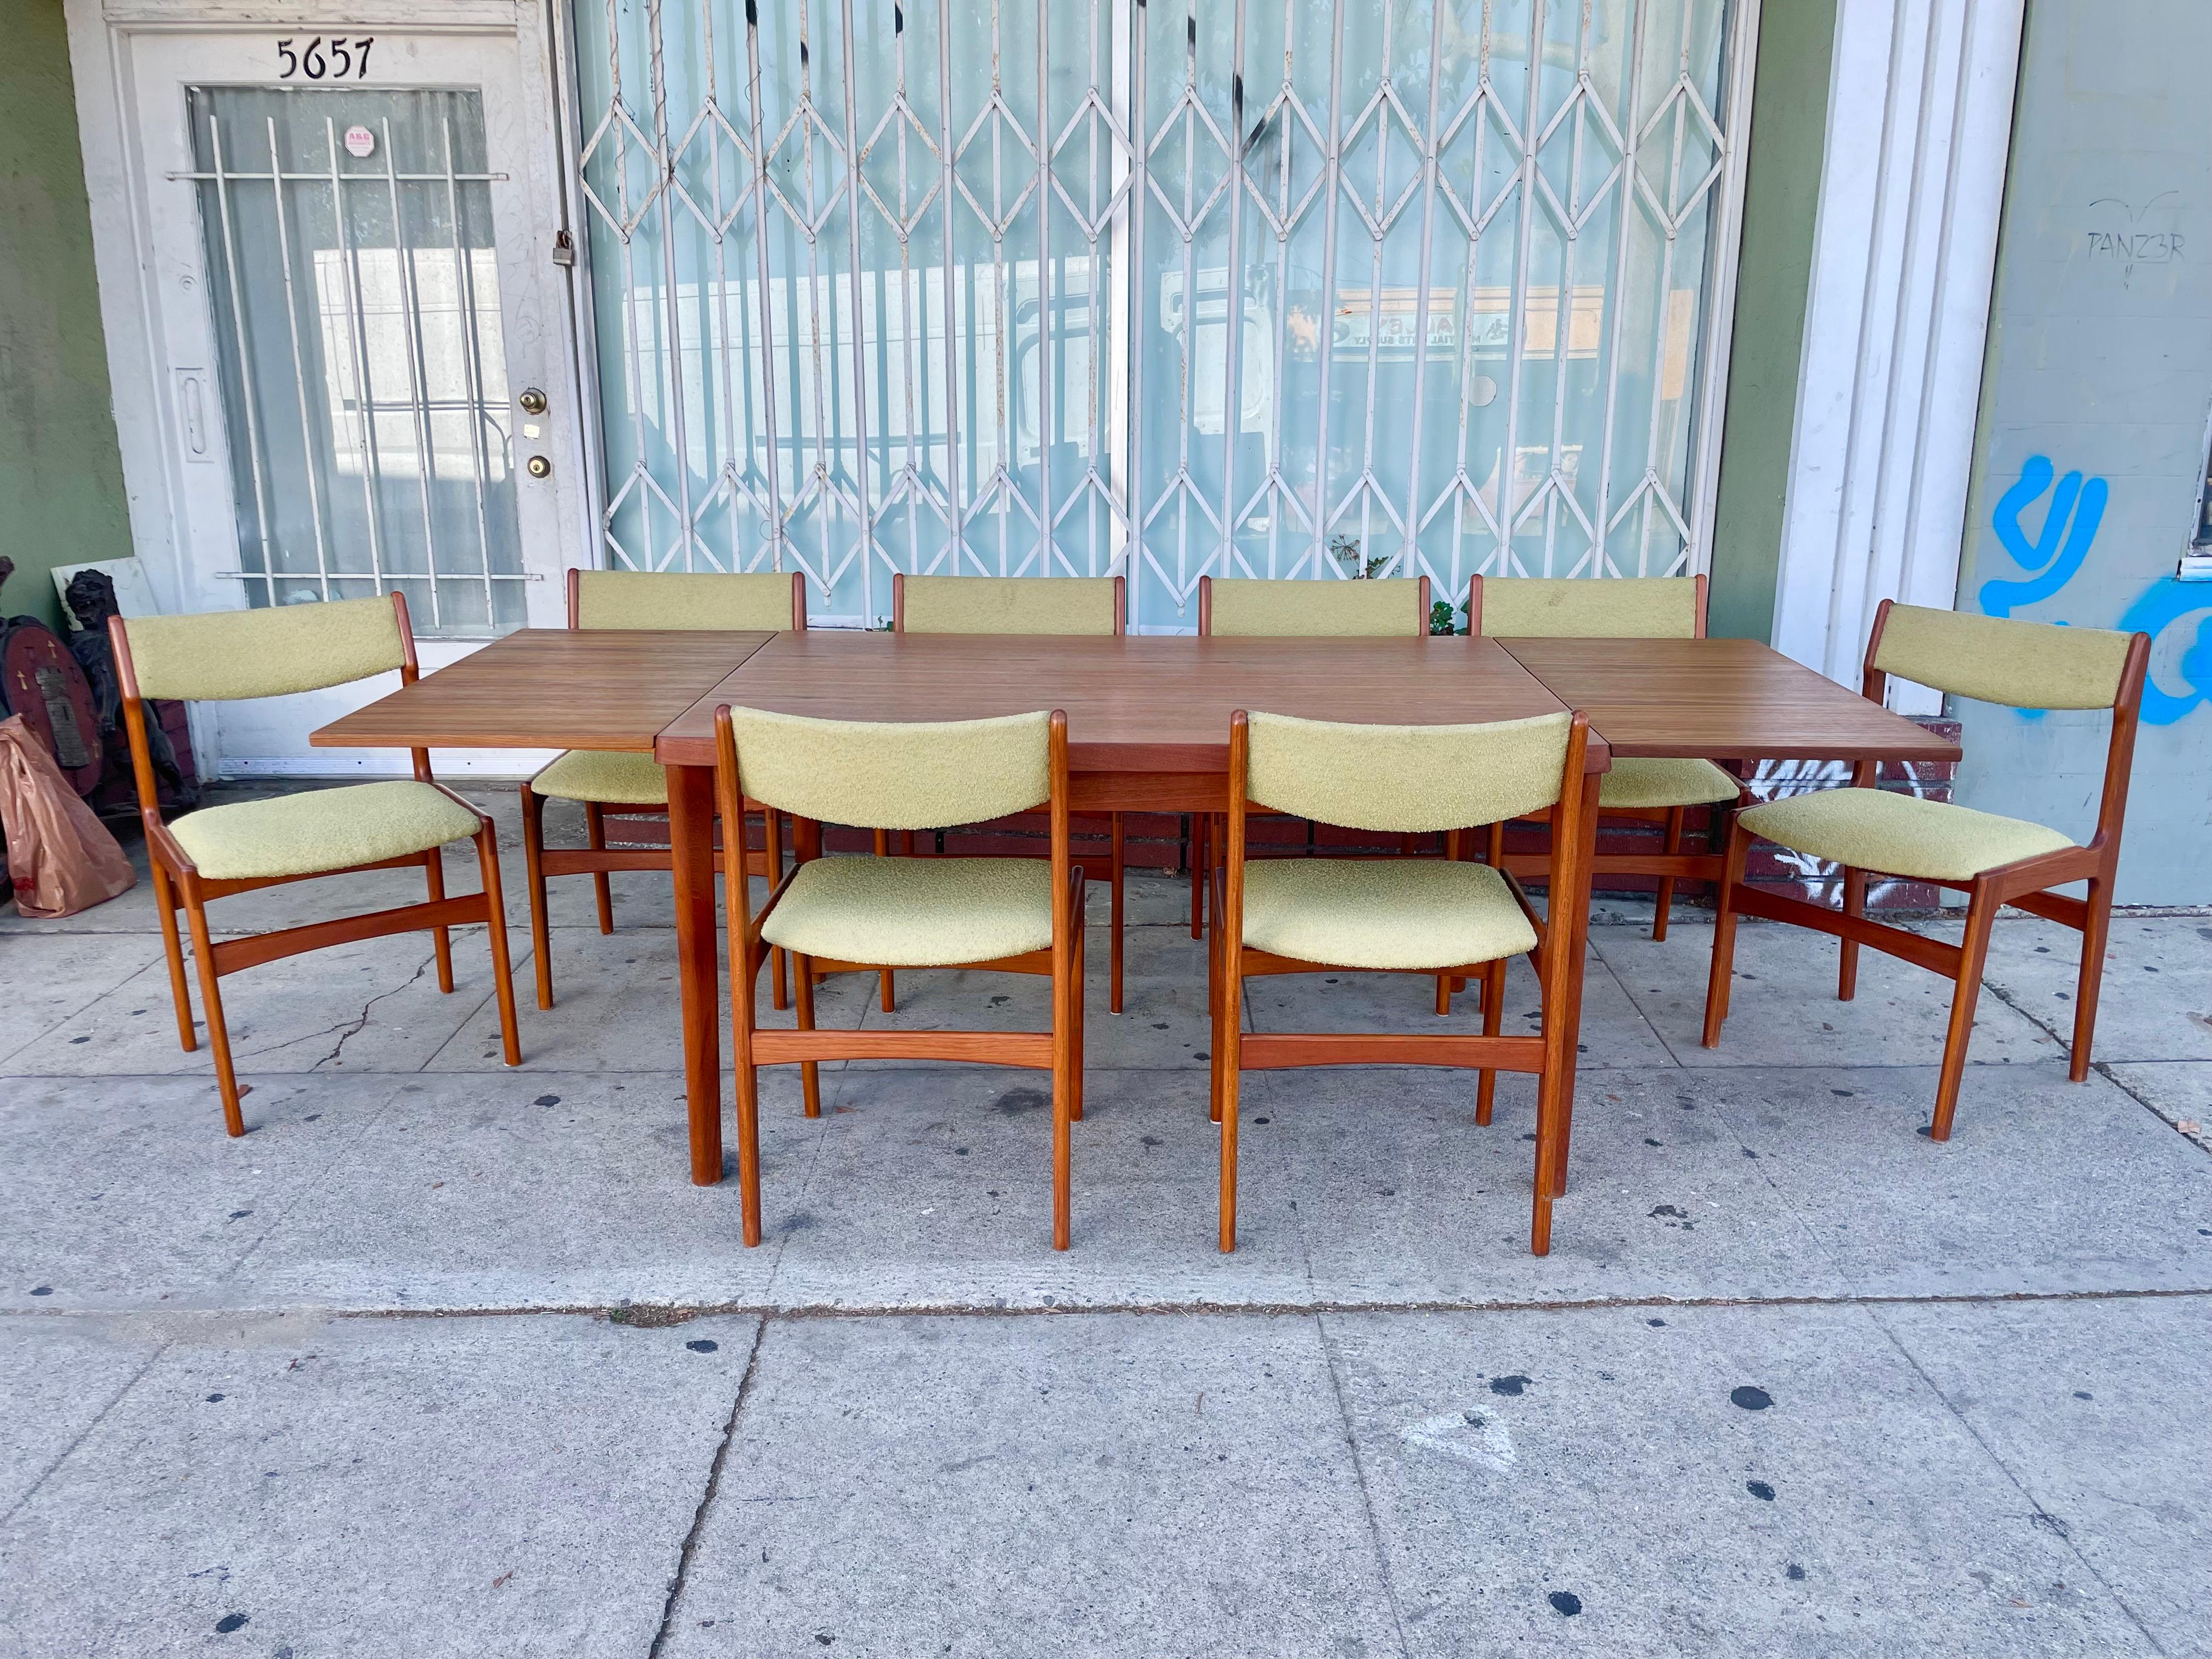 Danish modern teak dining set designed and manufactured in Denmark circa 1960s. This beautiful dining room set consists of two pull-out extensions that are easily pulled out and extended, giving you and your guest plenty of space. The set also comes